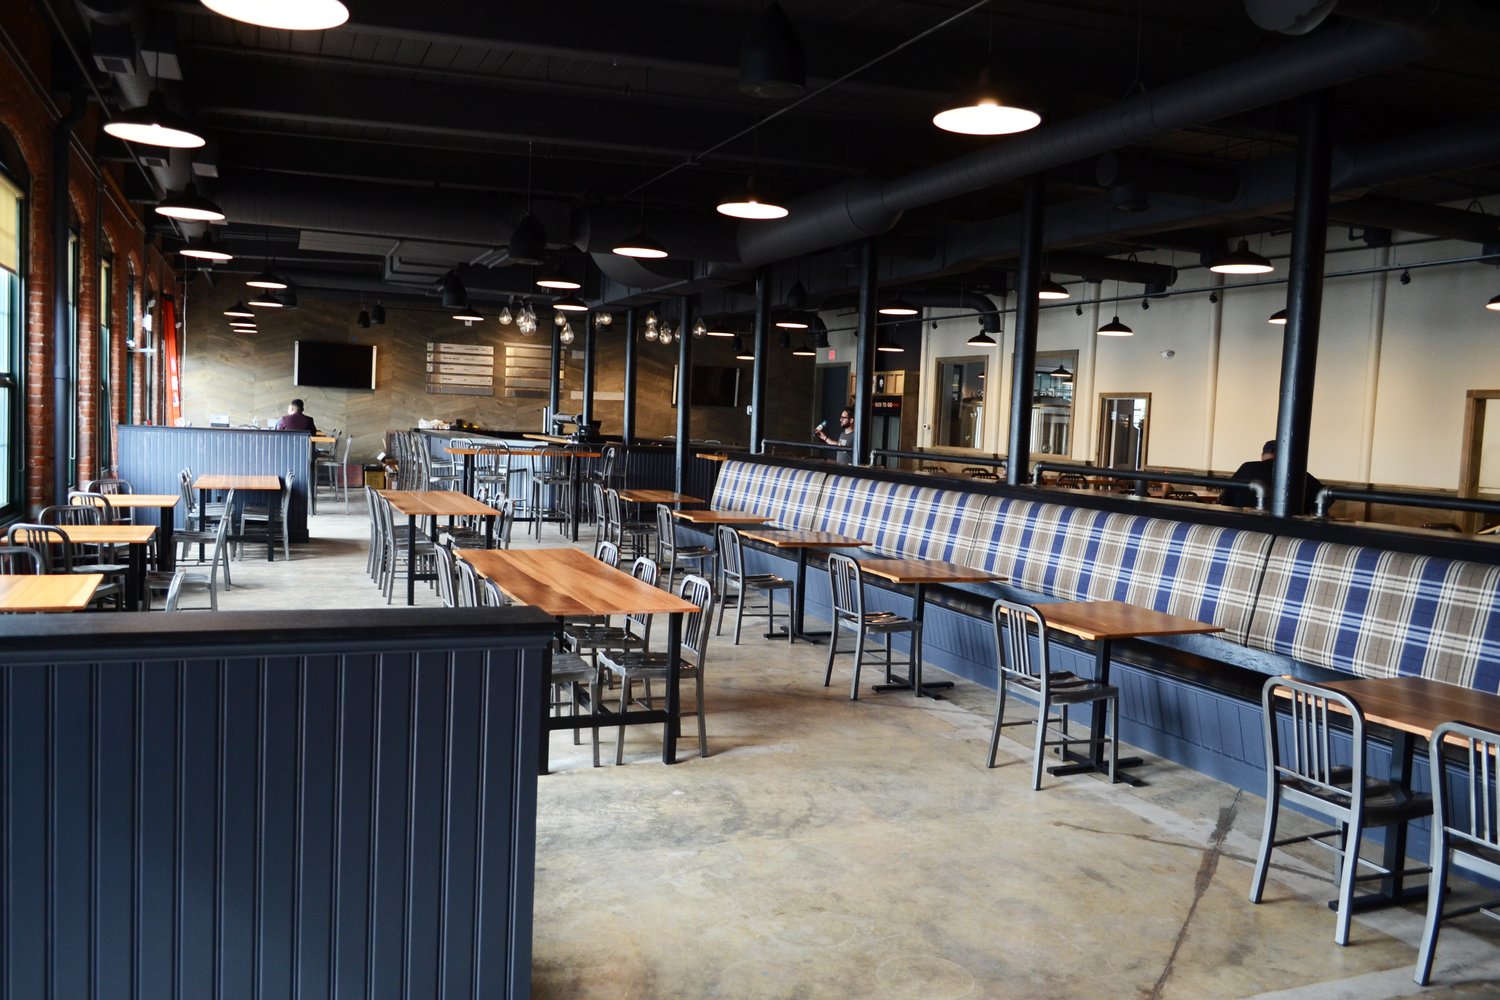 The inside will seat 140 patrons with a variety of communal seating options.